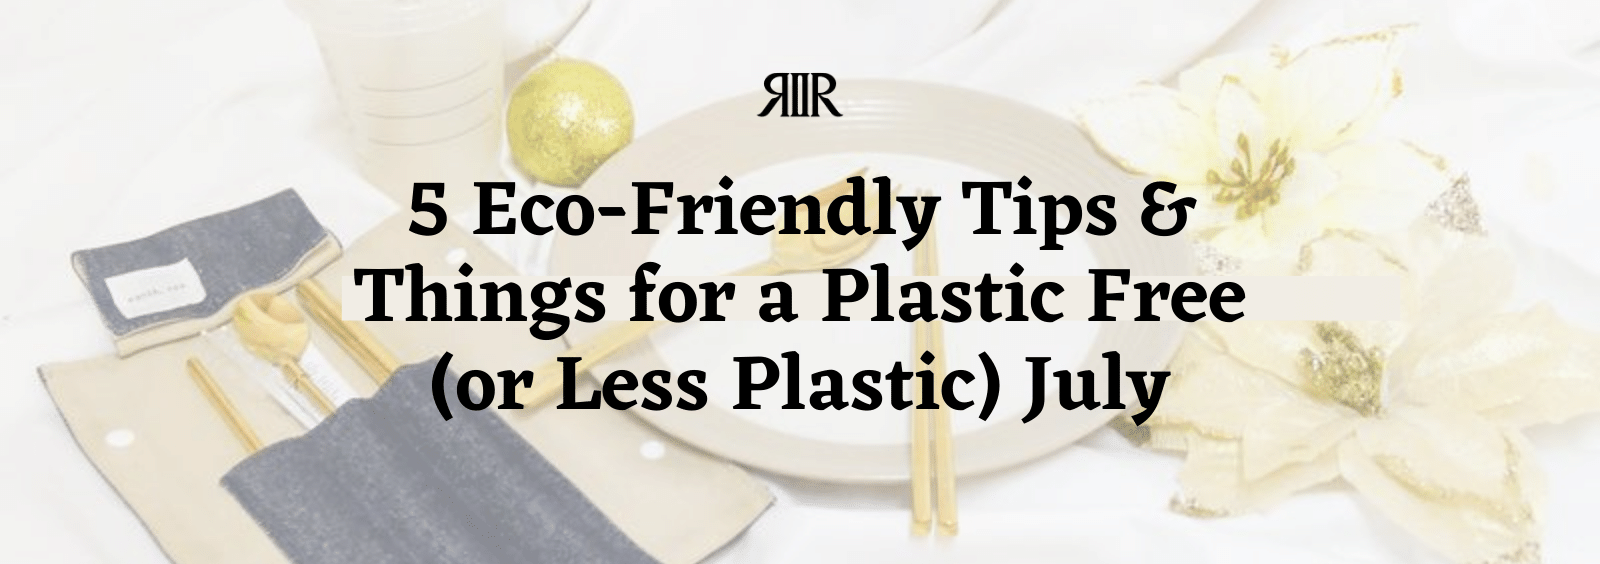 5 Eco-Friendly Tips and Things for a Plastic Free (or Less Plastic) July